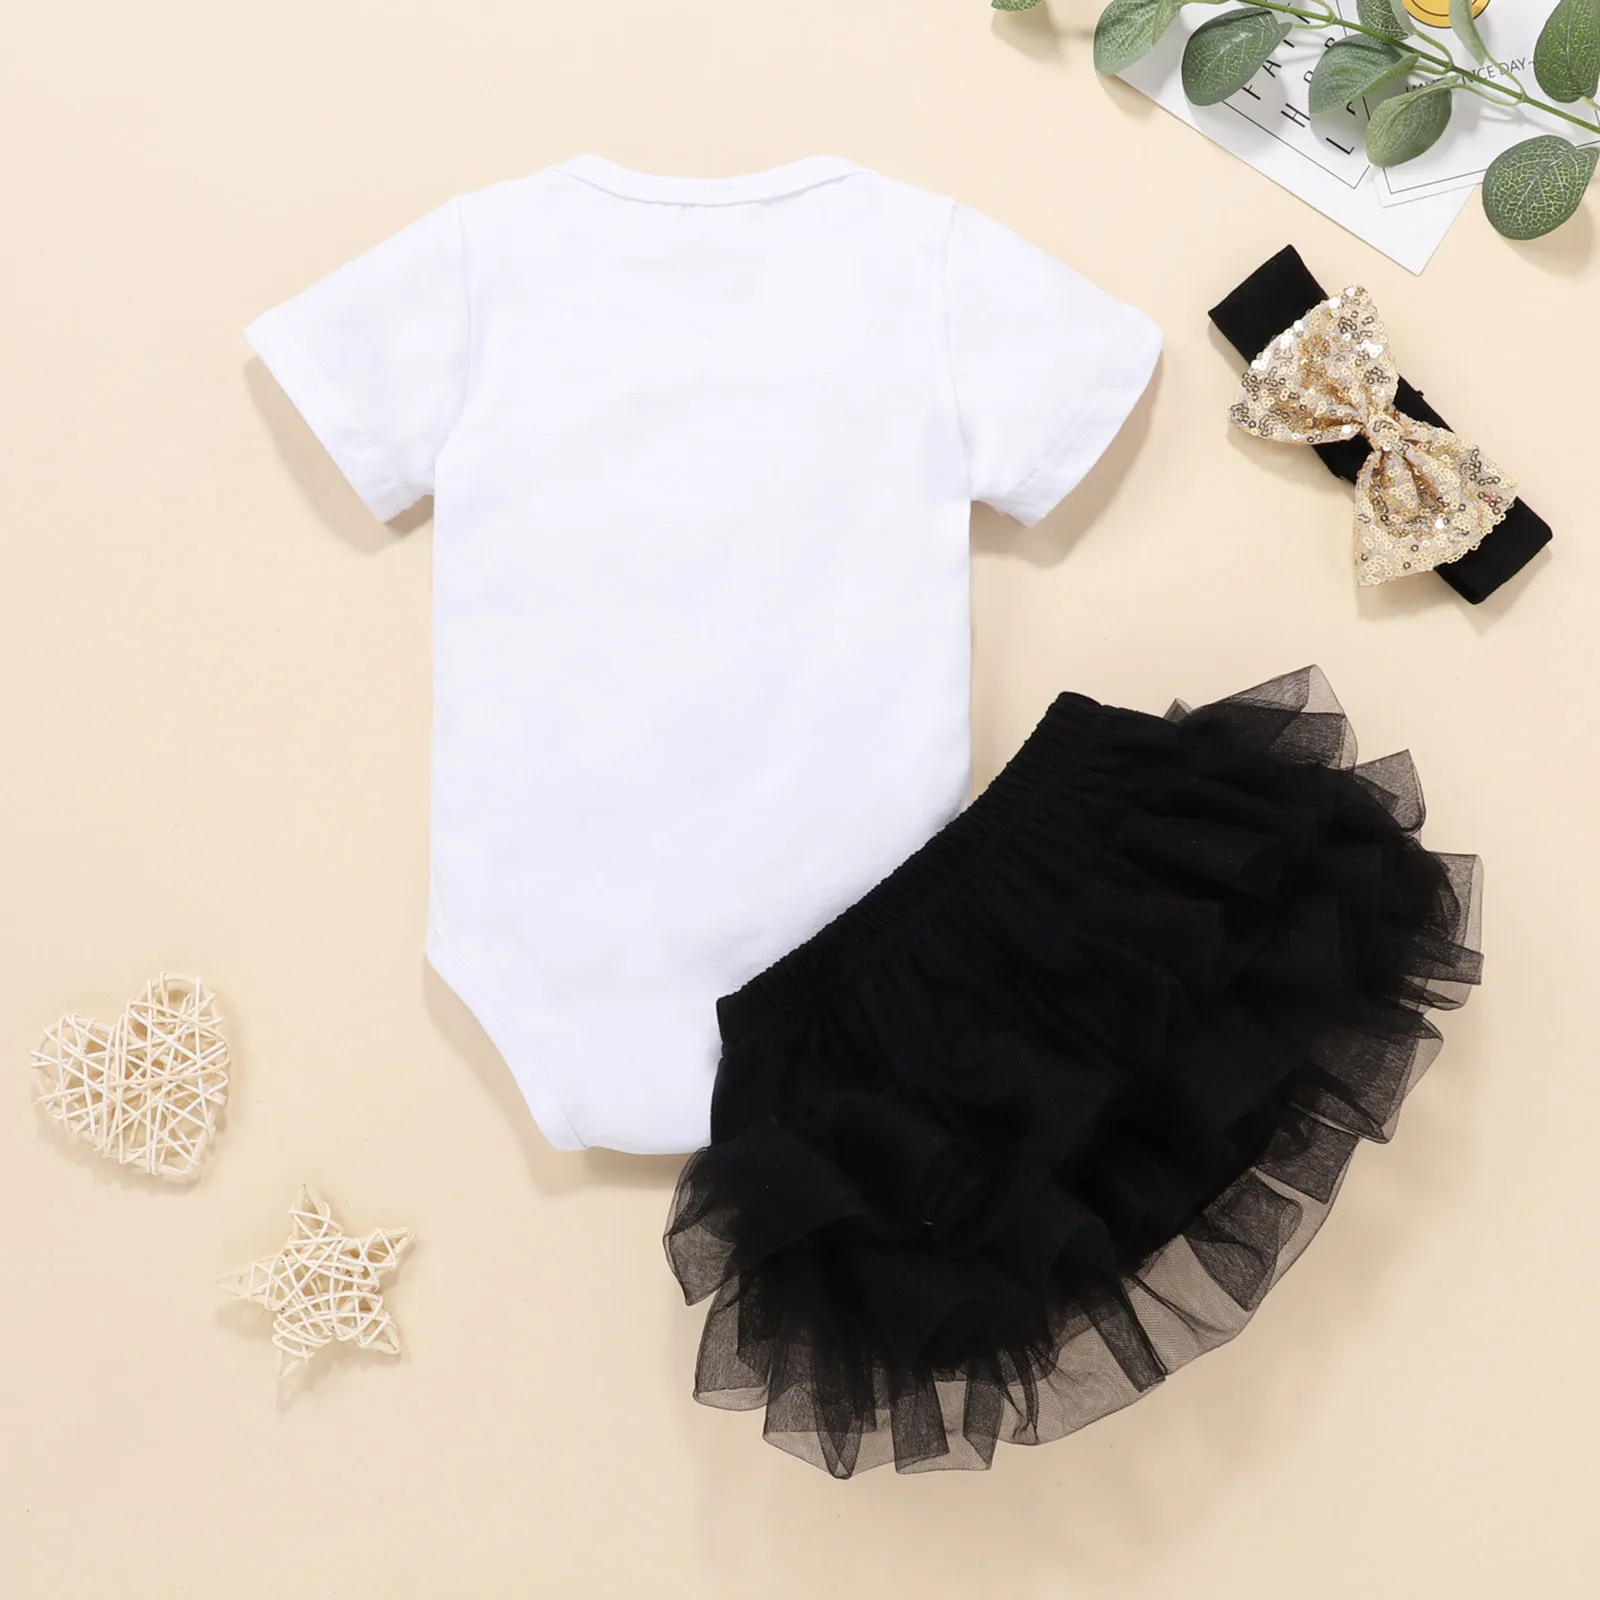 Infant Baby Girls Clothes Letter Romper Tops Bowknot Tulle Skirt Headband Outfit Clothes Sequins Baby Girl Outfit For Summer baby clothing set long sleeve	